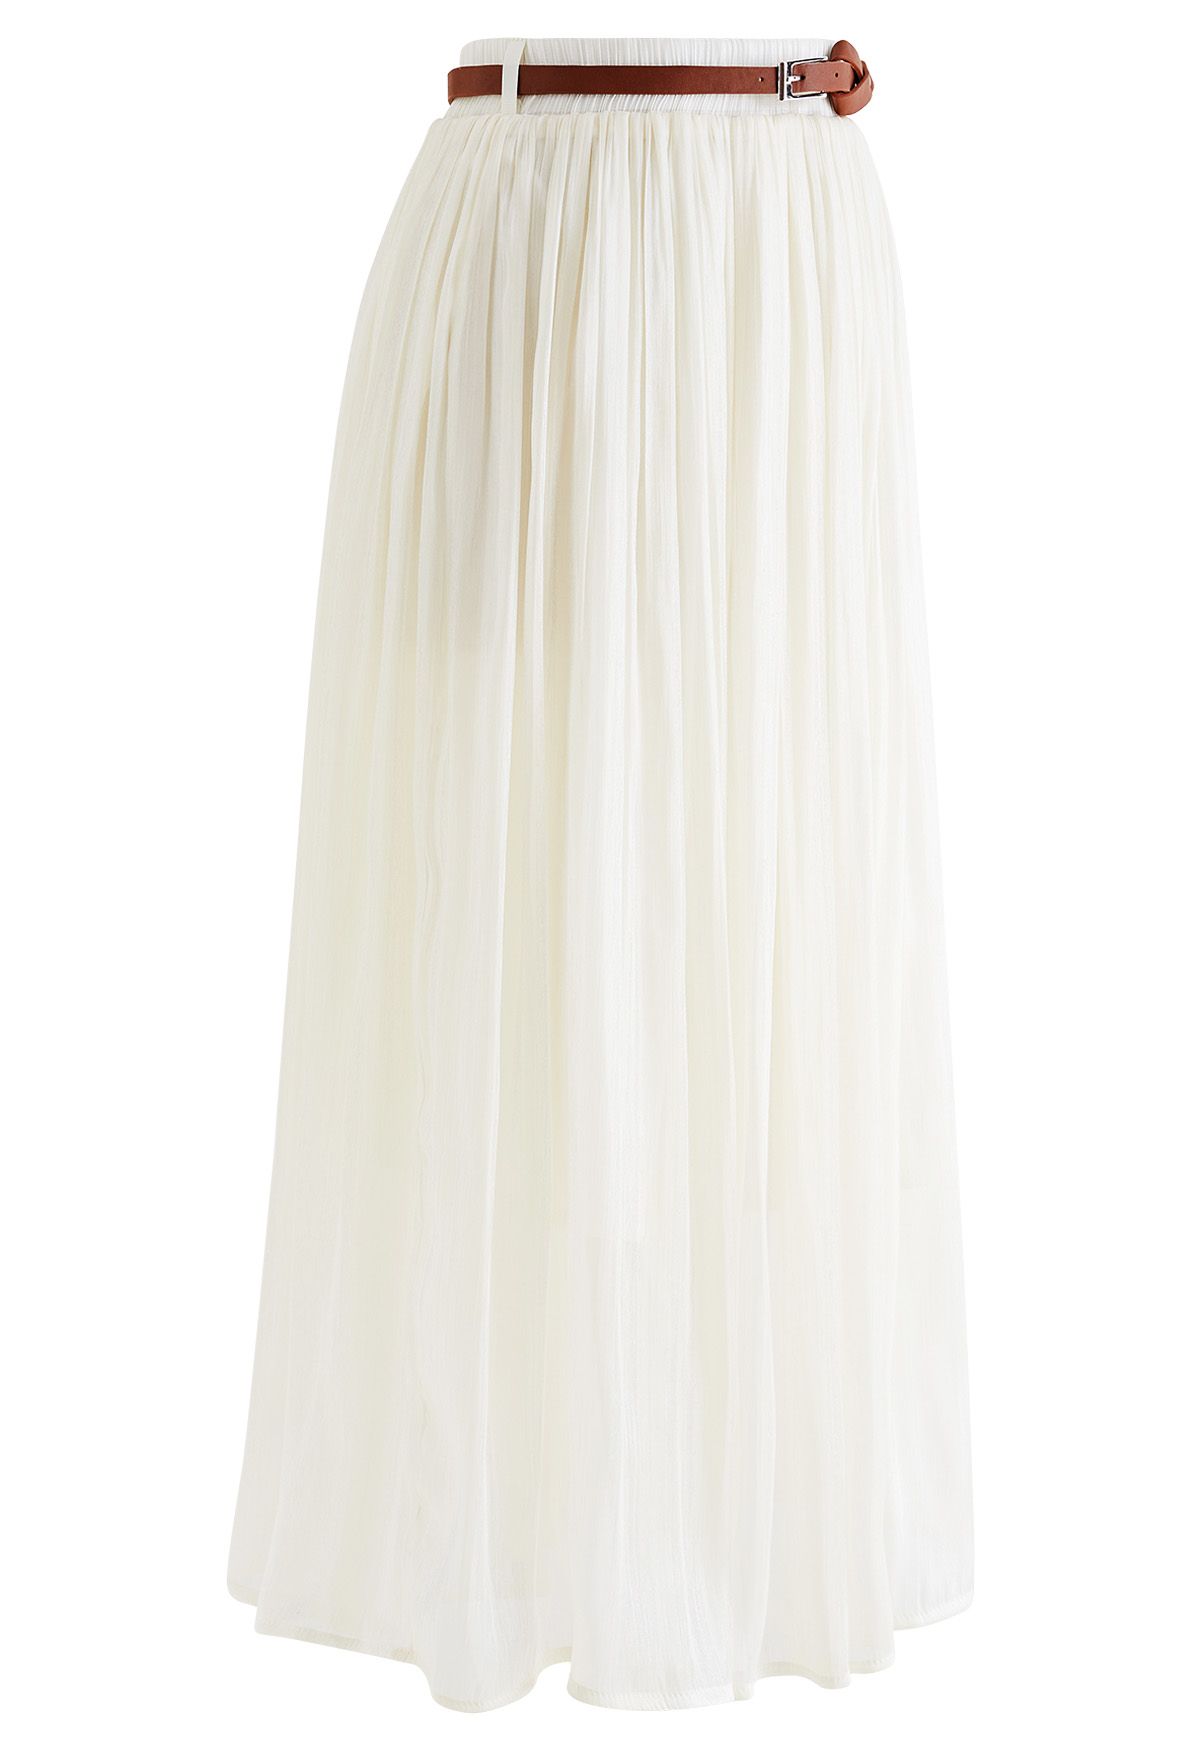 Shimmery Pleated Belt Maxi Skirt in Cream - Retro, Indie and Unique Fashion